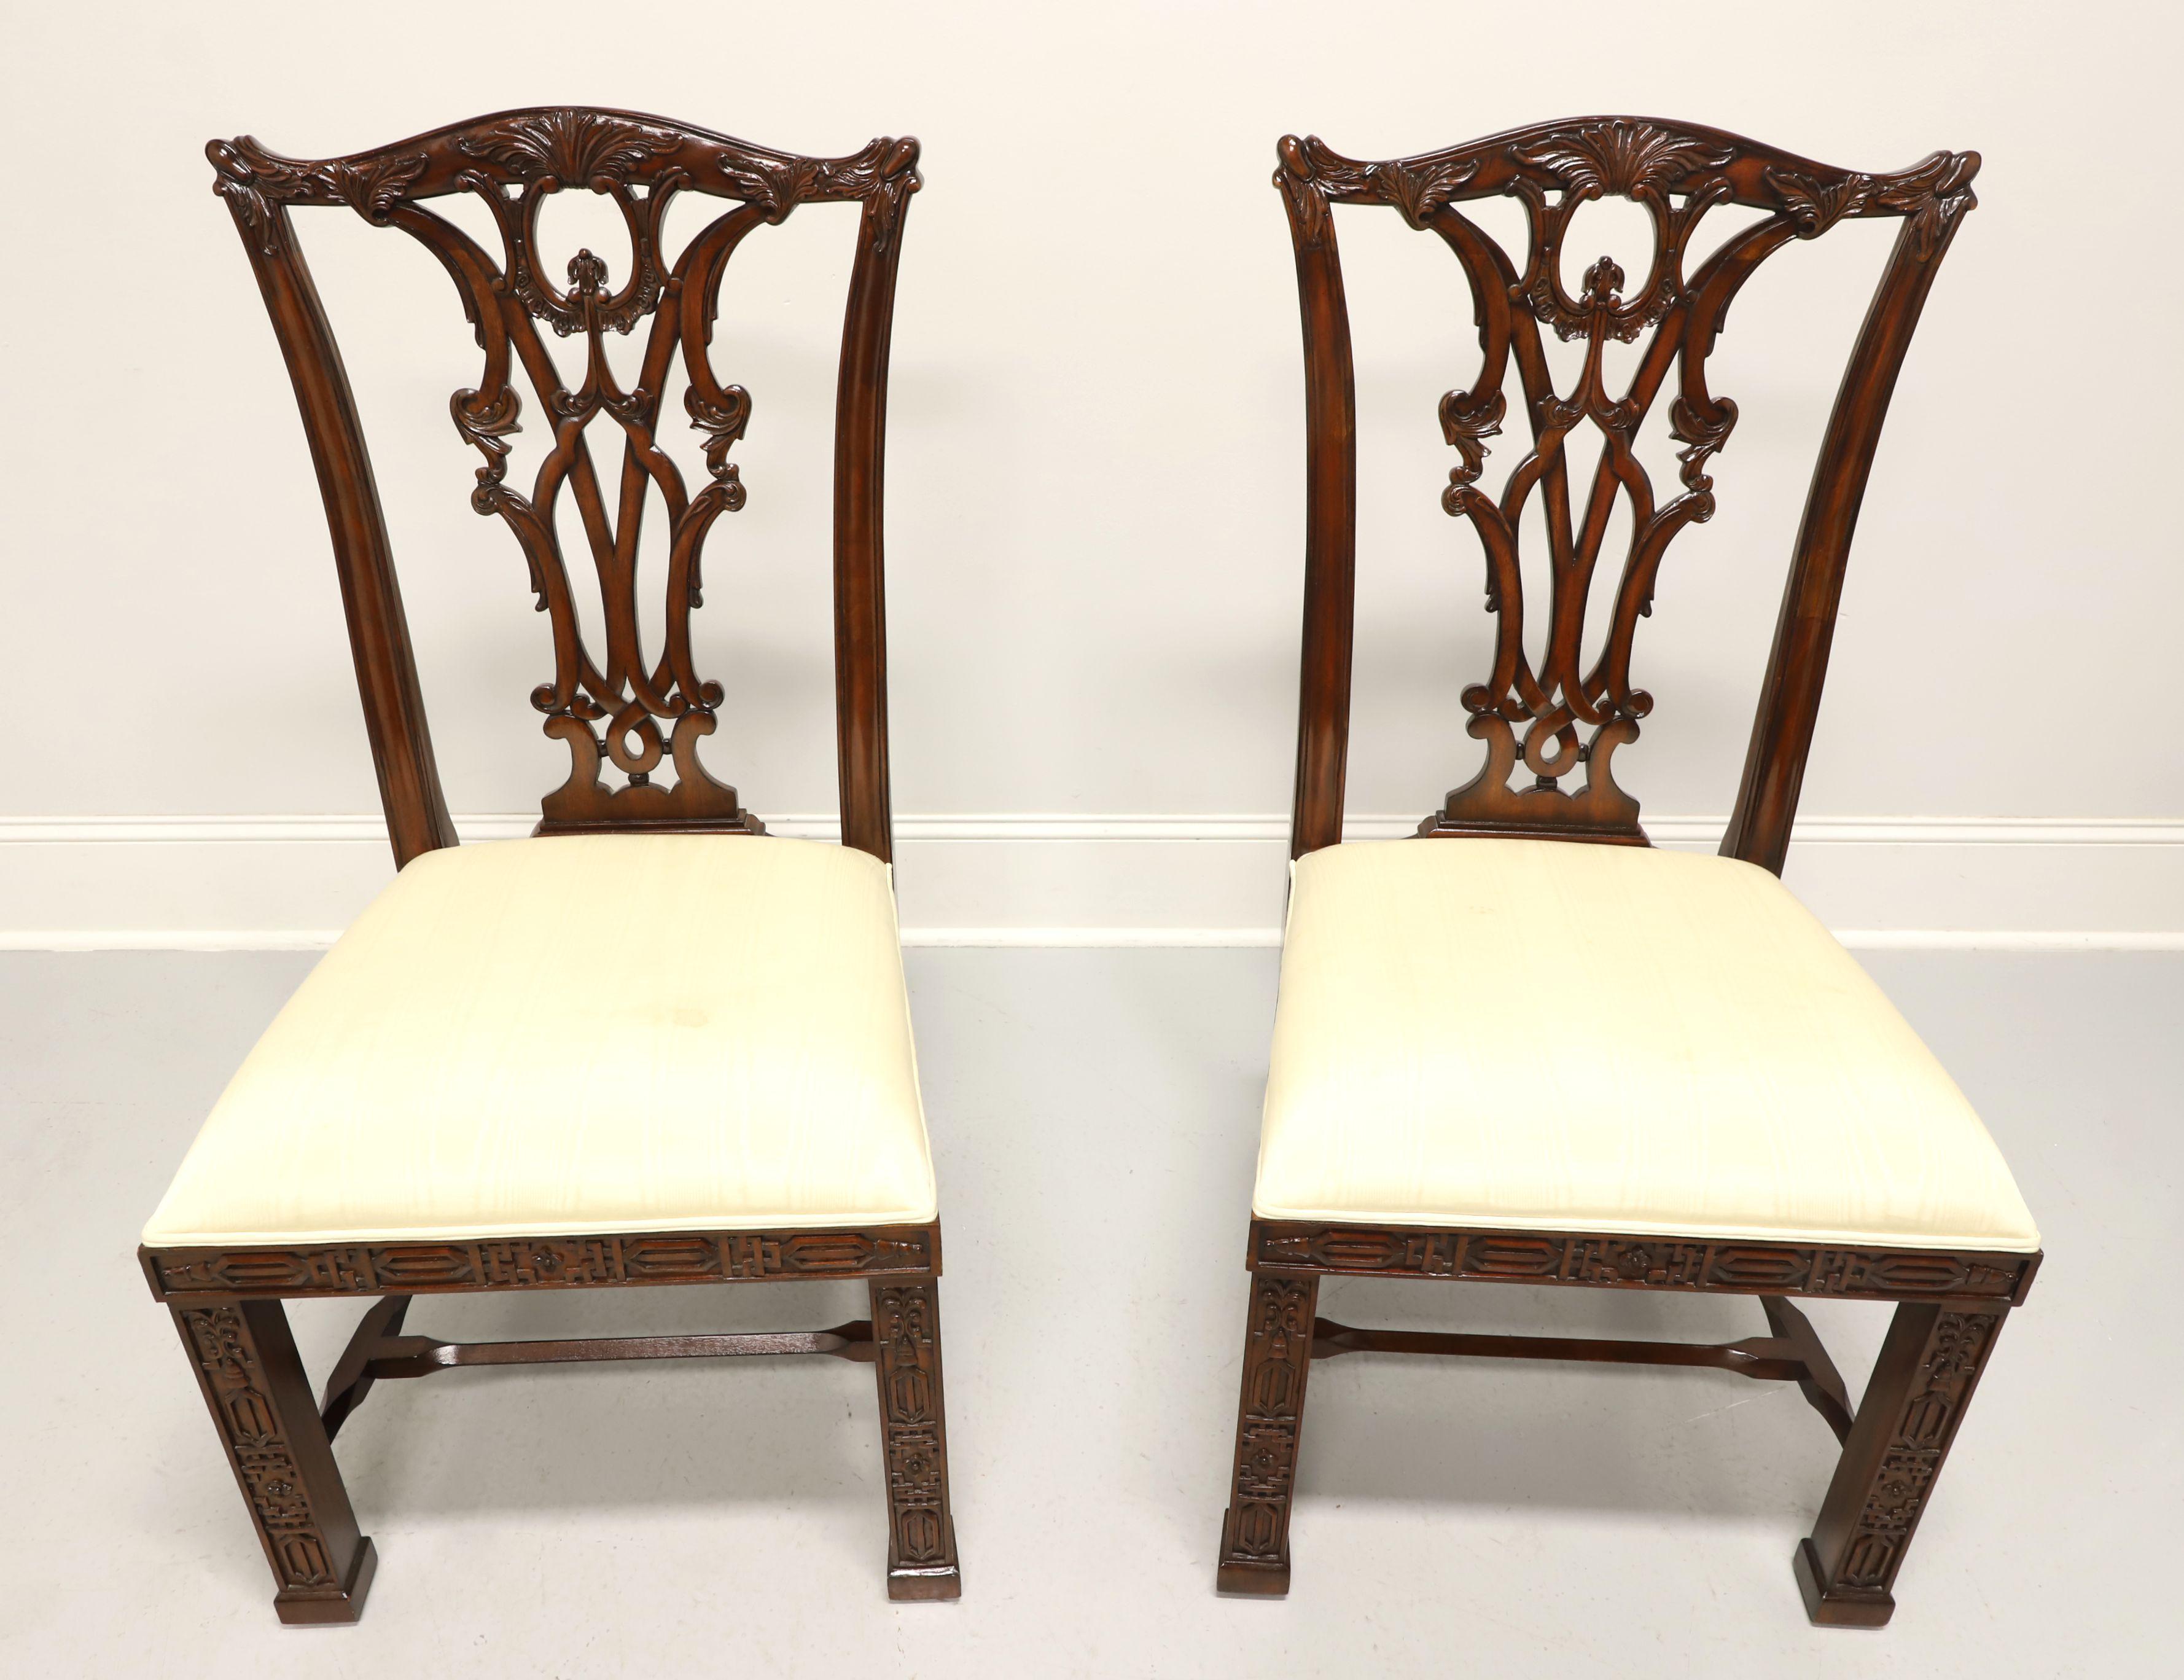 A pair of Chippendale style dining side chairs by Maitland Smith. Solid mahogany with carved crest rail, backrest, decorative fretwork details to apron & straight front legs, and stretchers. Seats are upholstered in a neutral cream colored fabric.